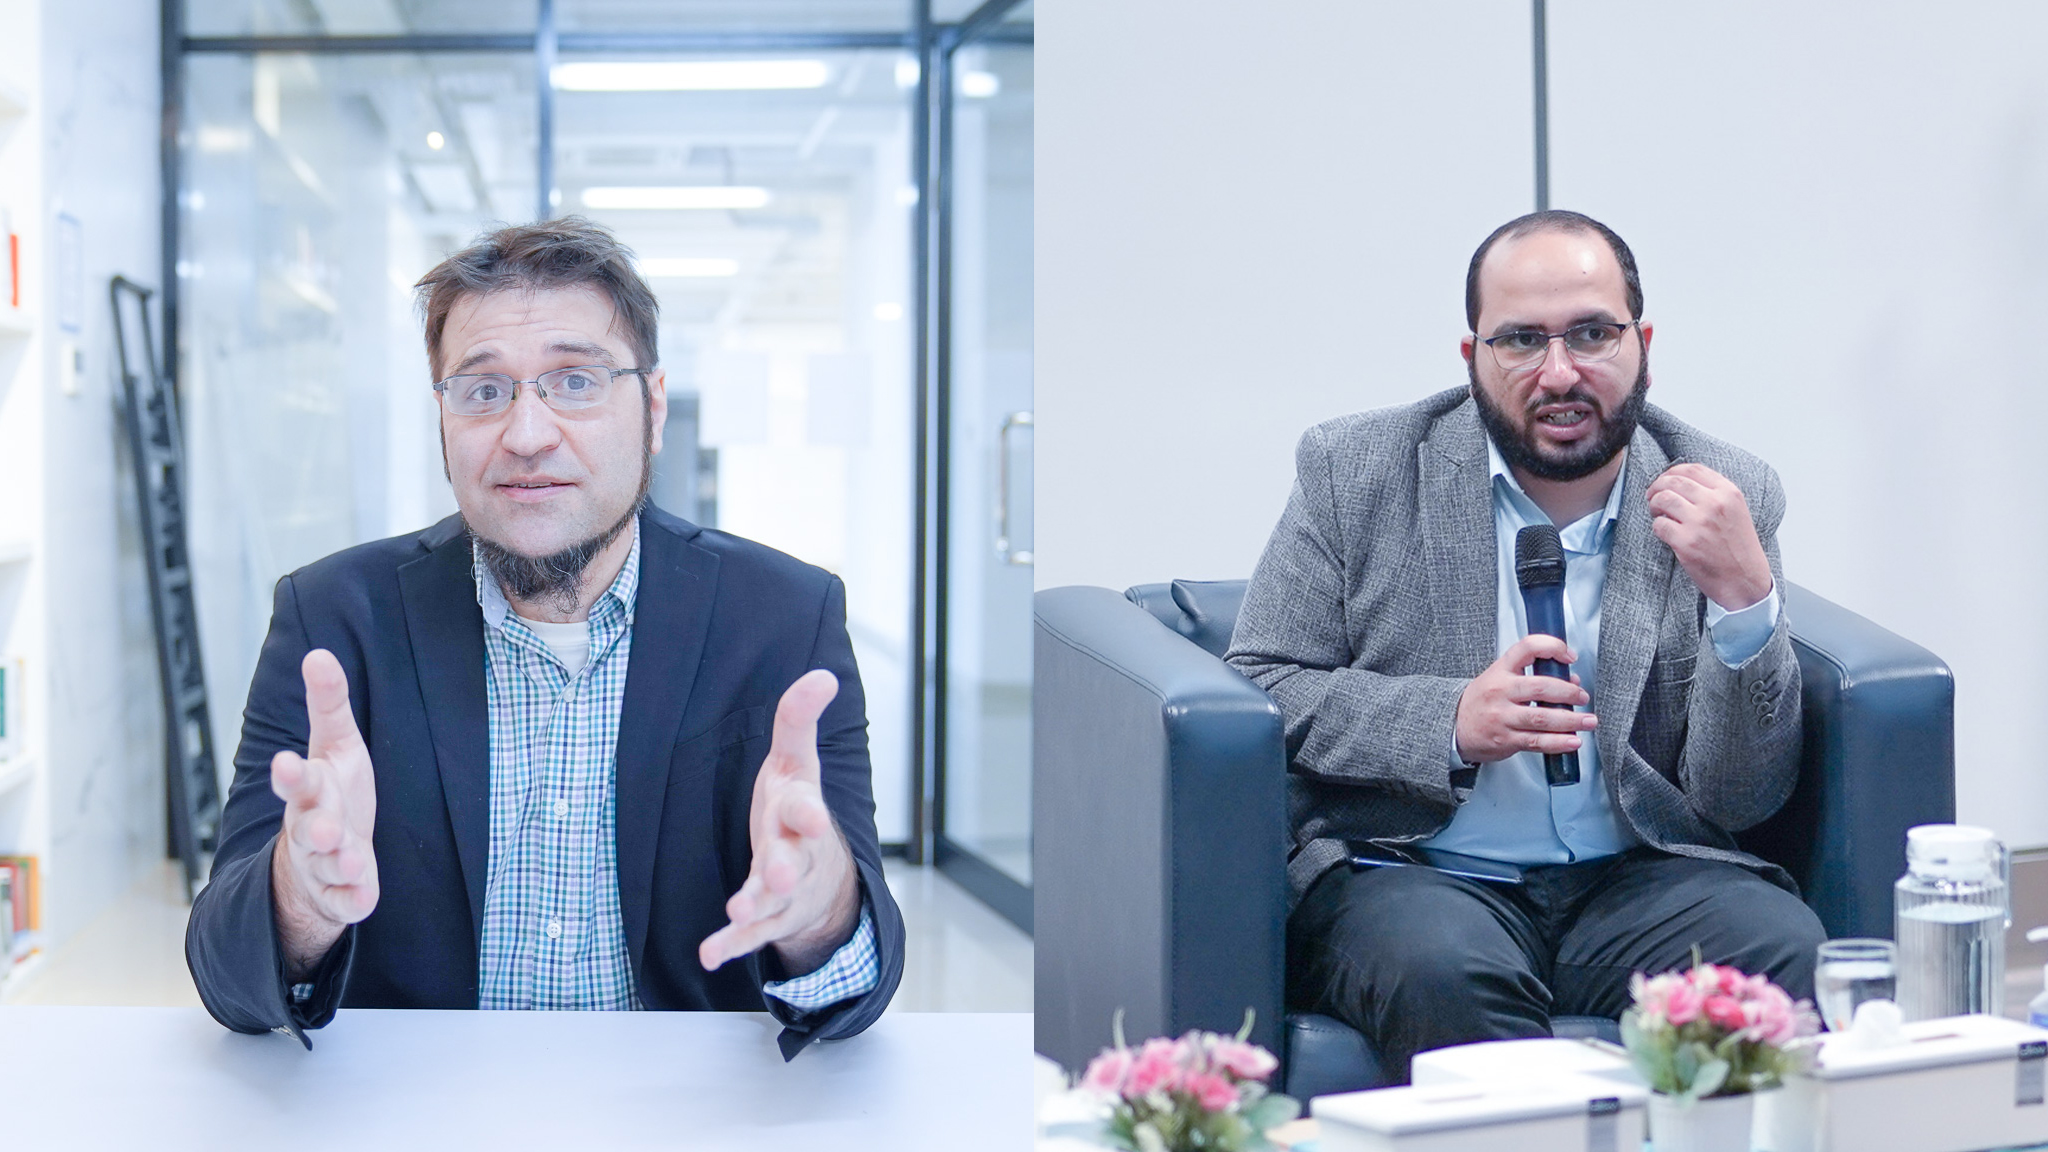 Embracing Global Perspectives: UIII Introduces Two Permanent International Lecturers